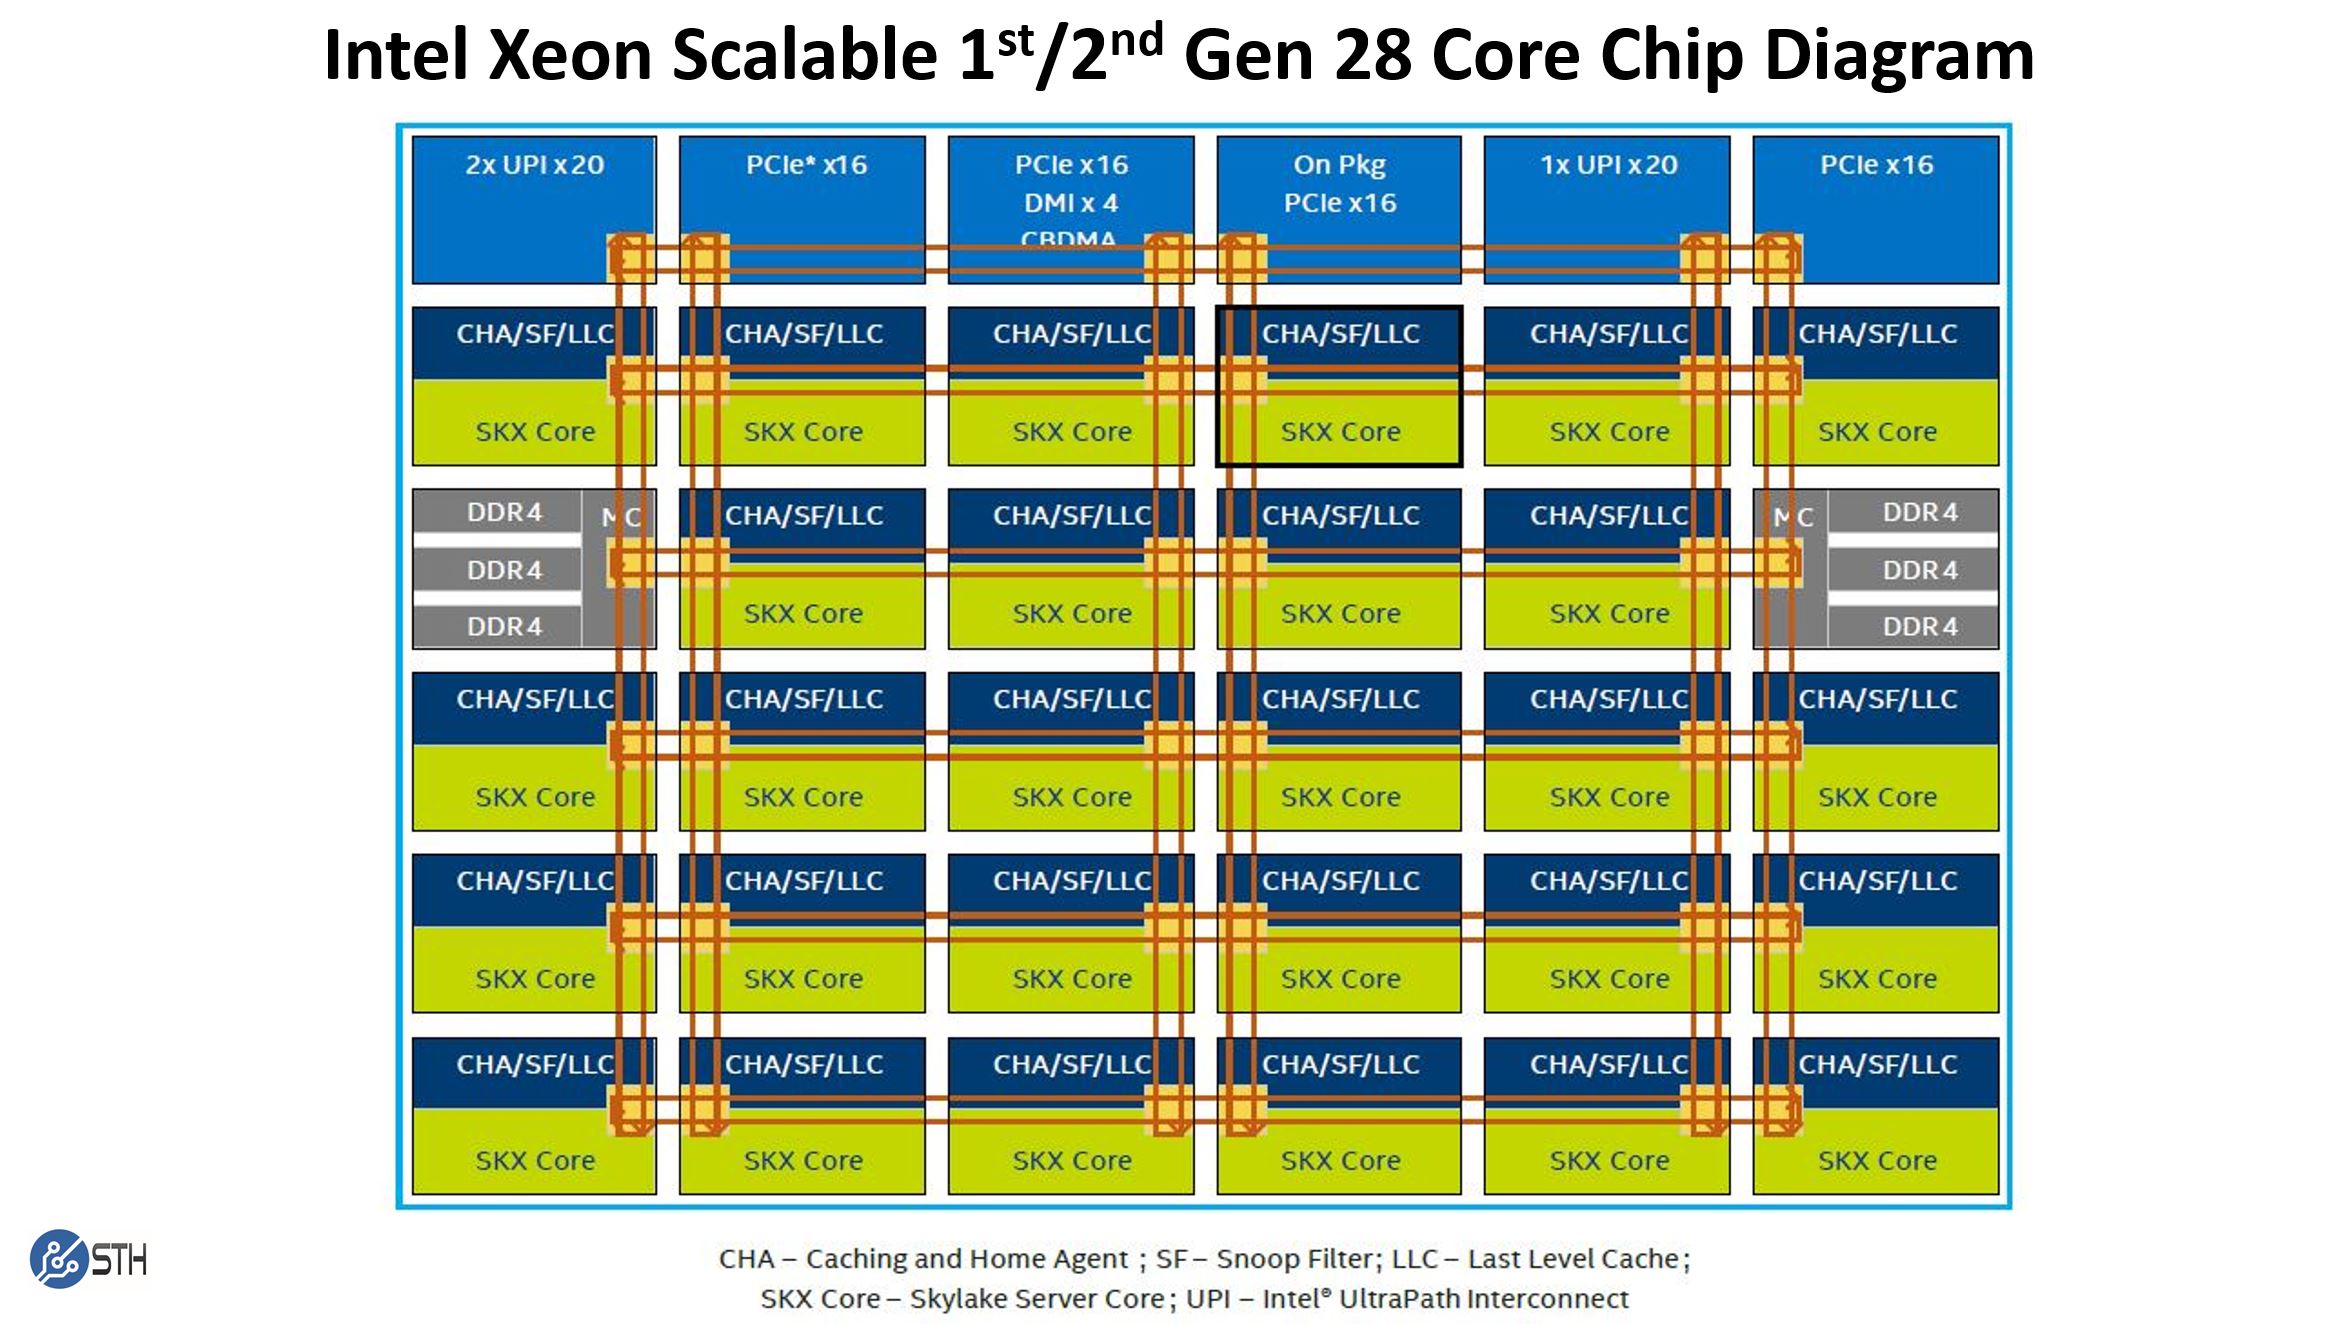 Intel Xeon Scalable 28 Core Chip Illustration